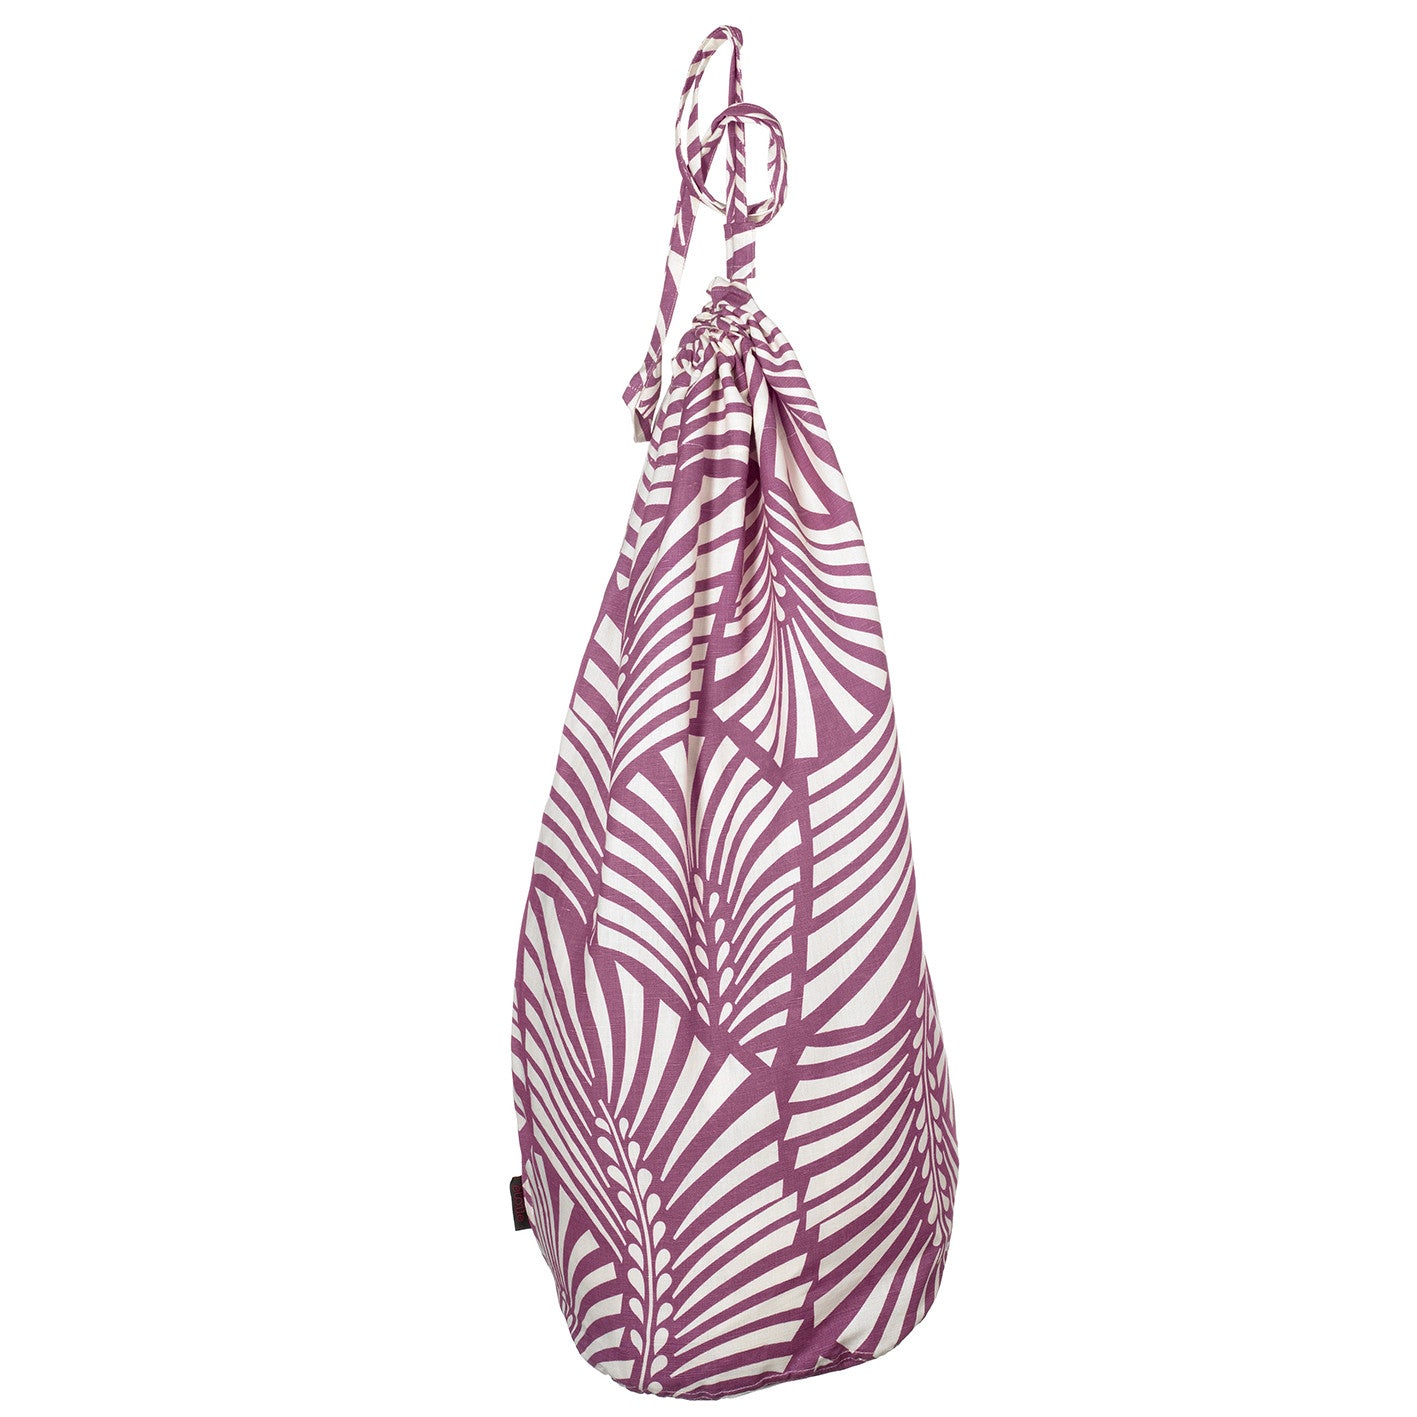 Oscar Palm Leaf Pattern Printed Linen Cotton Drawstring Laundry & Storage Bag in Heather Pink Ships from Canada (USA)